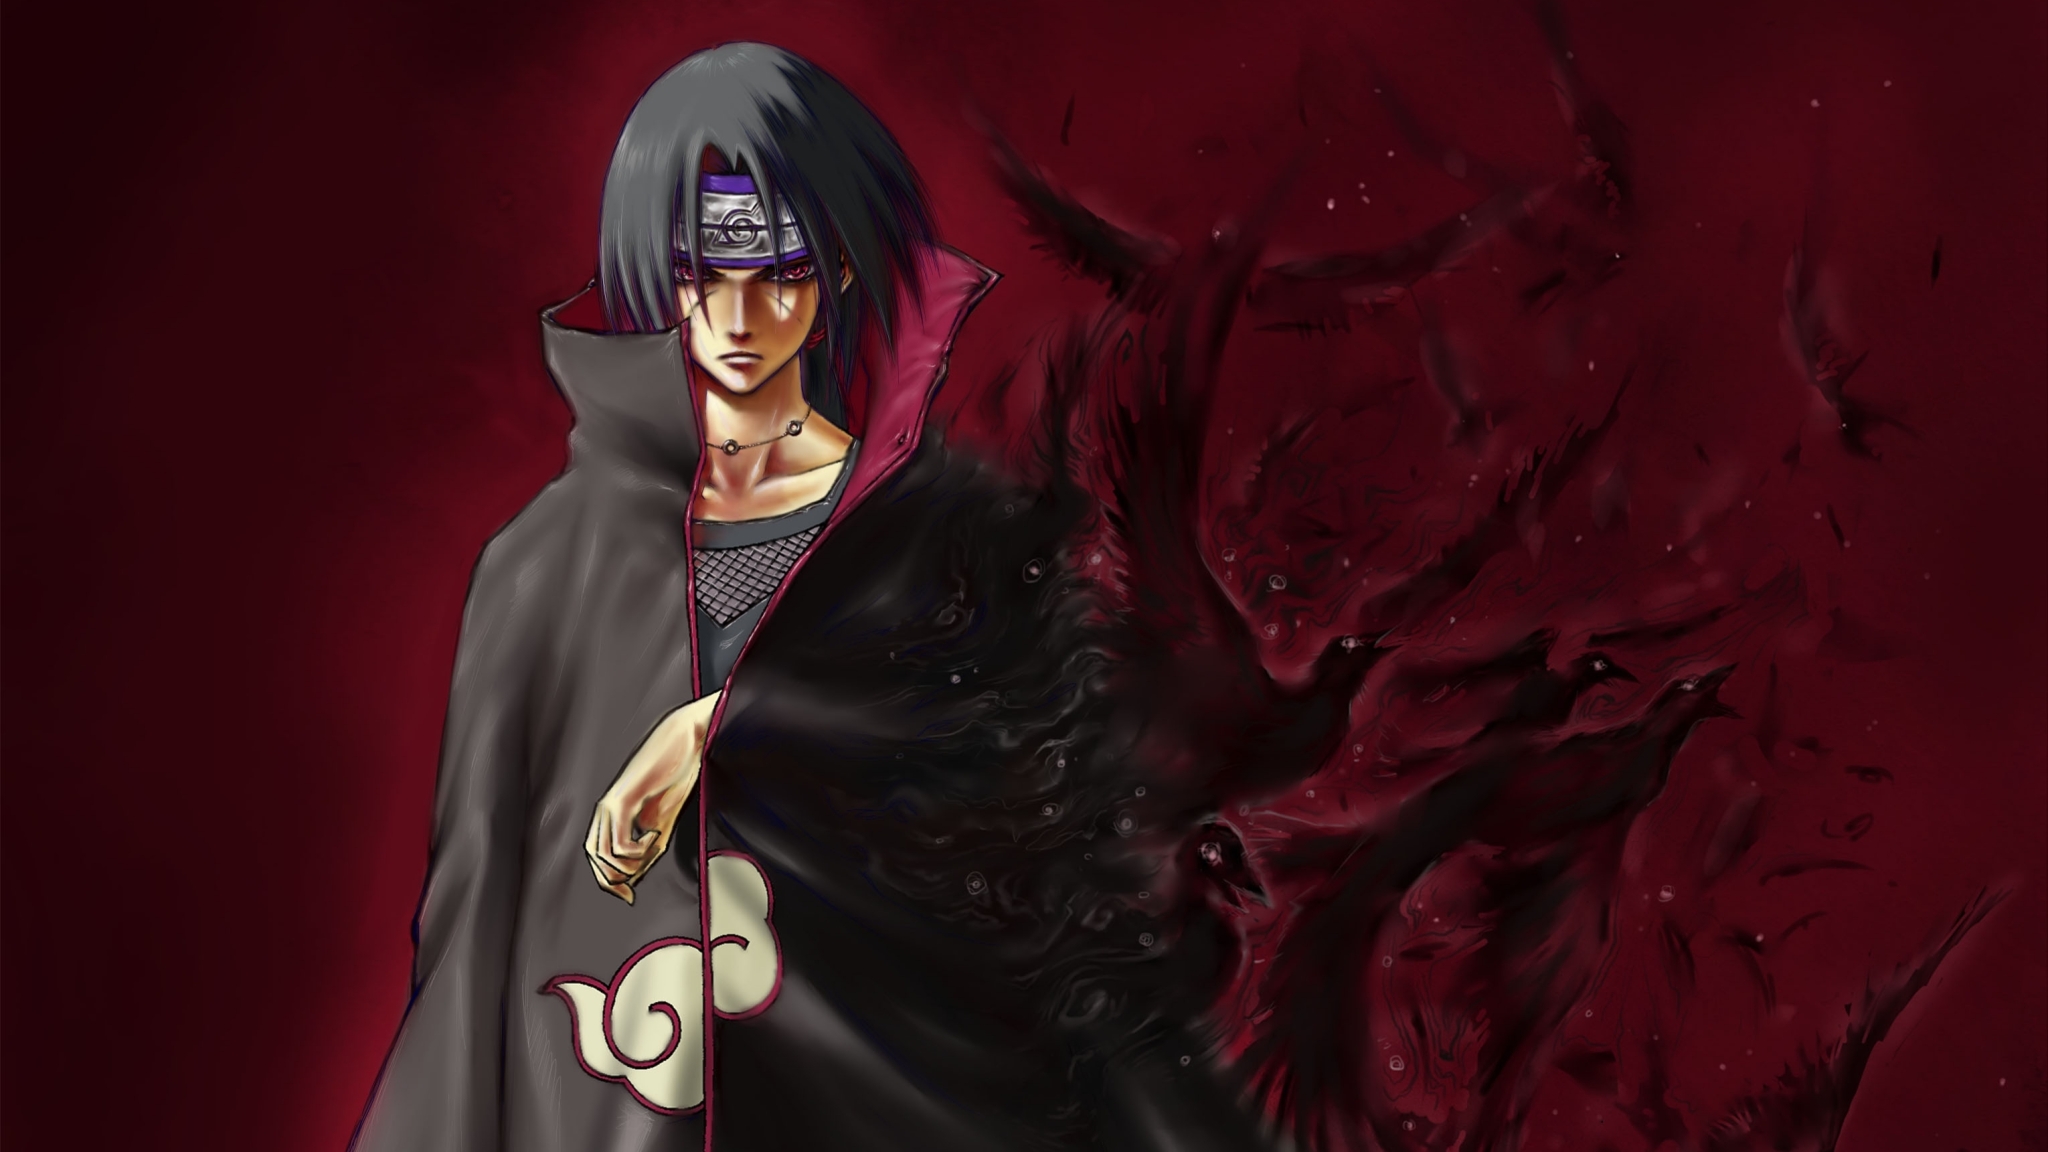 2048x1152 Itachi Uchiha Anime 2048x1152 Resolution Wallpaper Hd Anime 4k Wallpapers Images Photos And Background